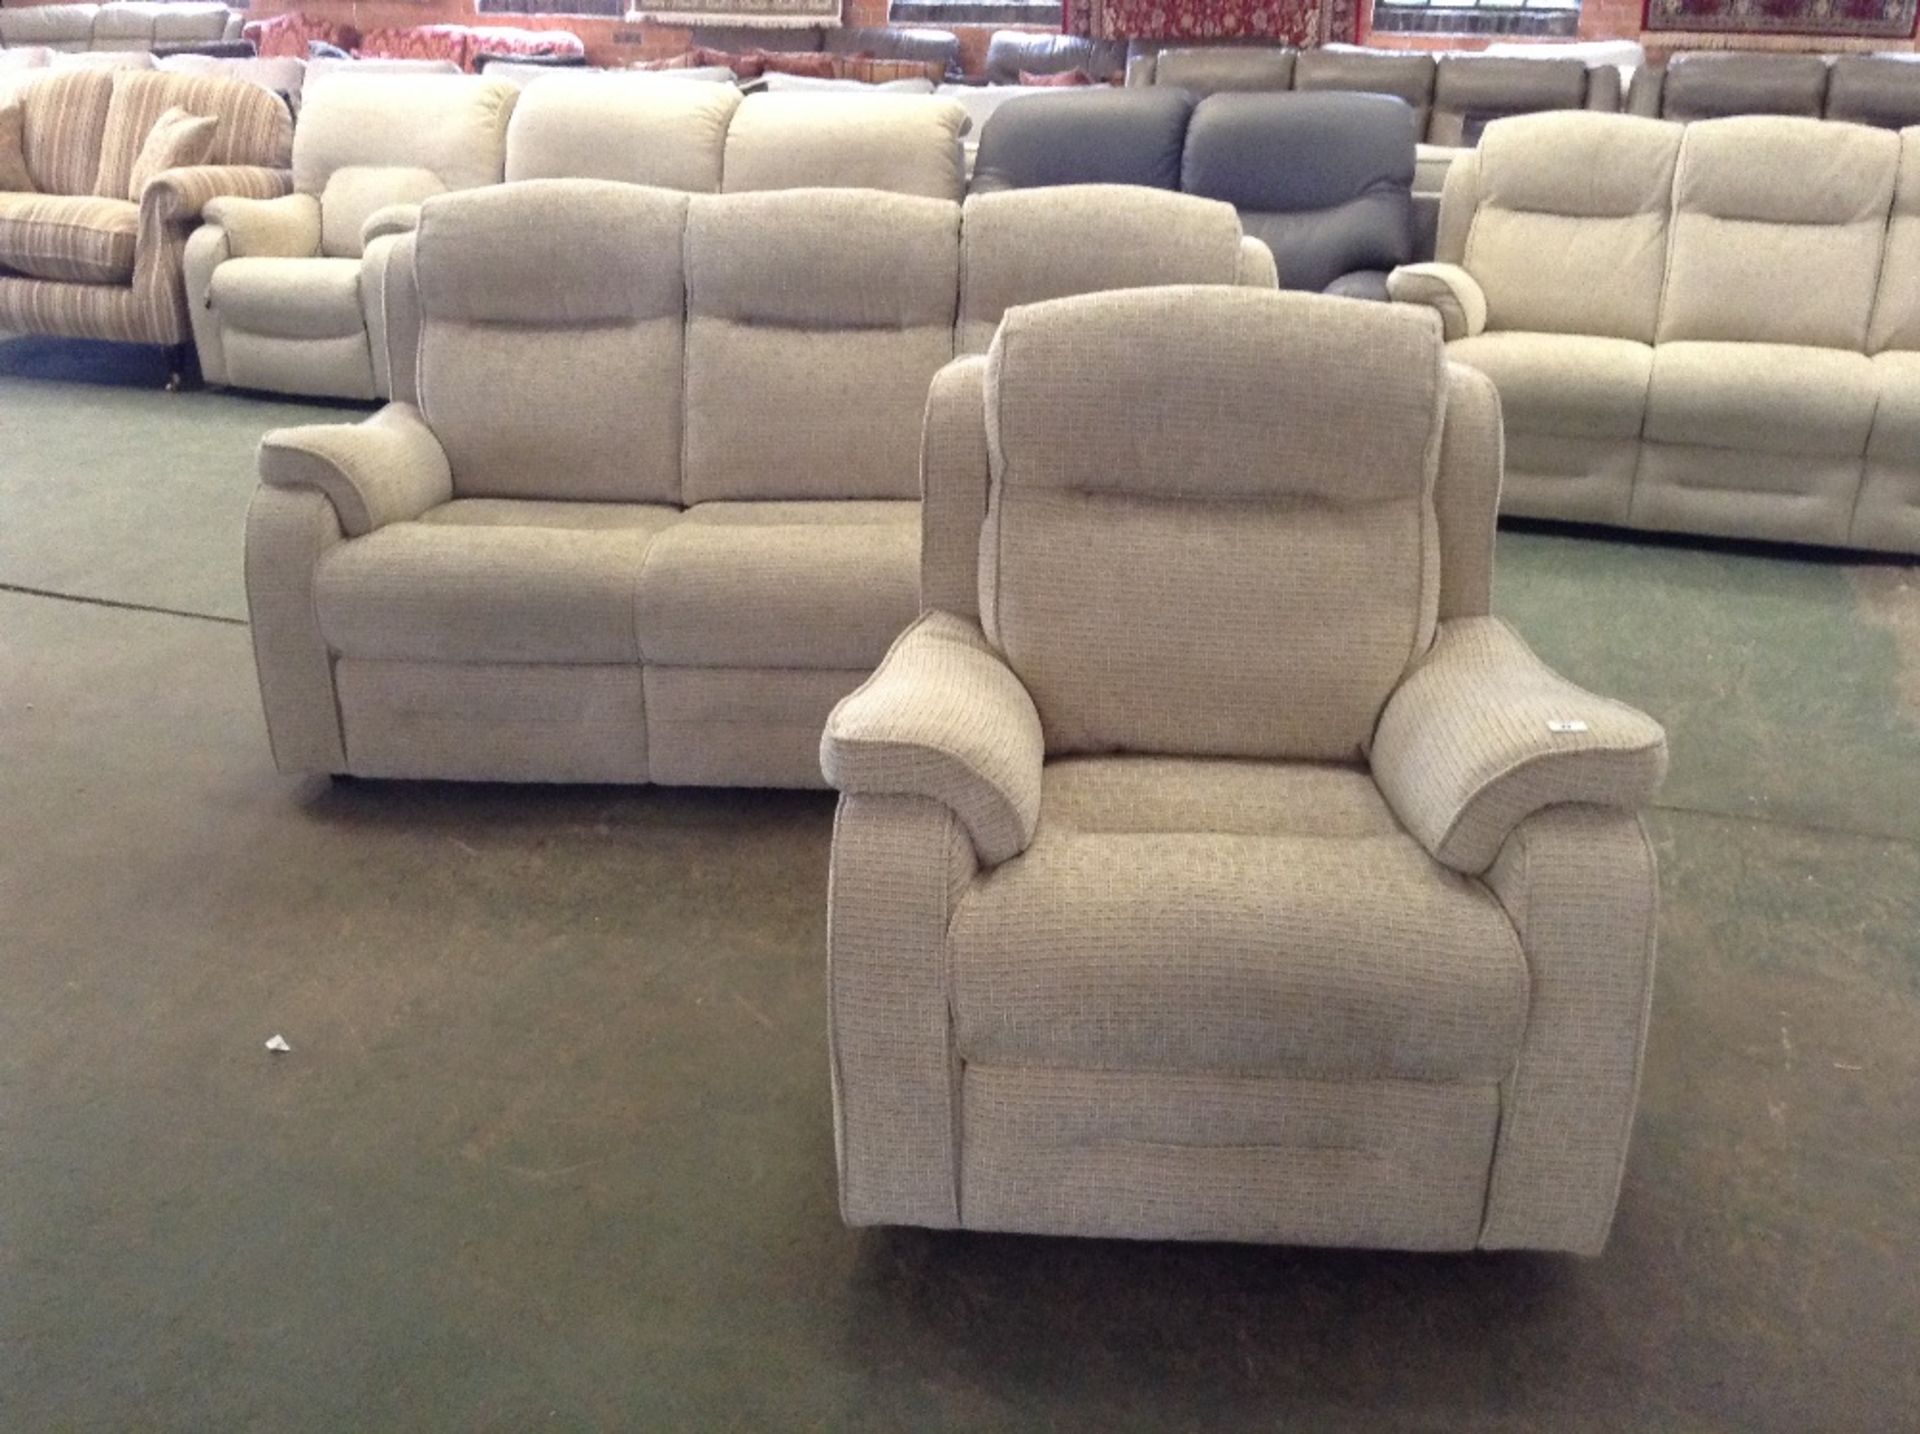 NATURAL 3 SEATER SOFA AND CHAIR (TR000871 WO021895